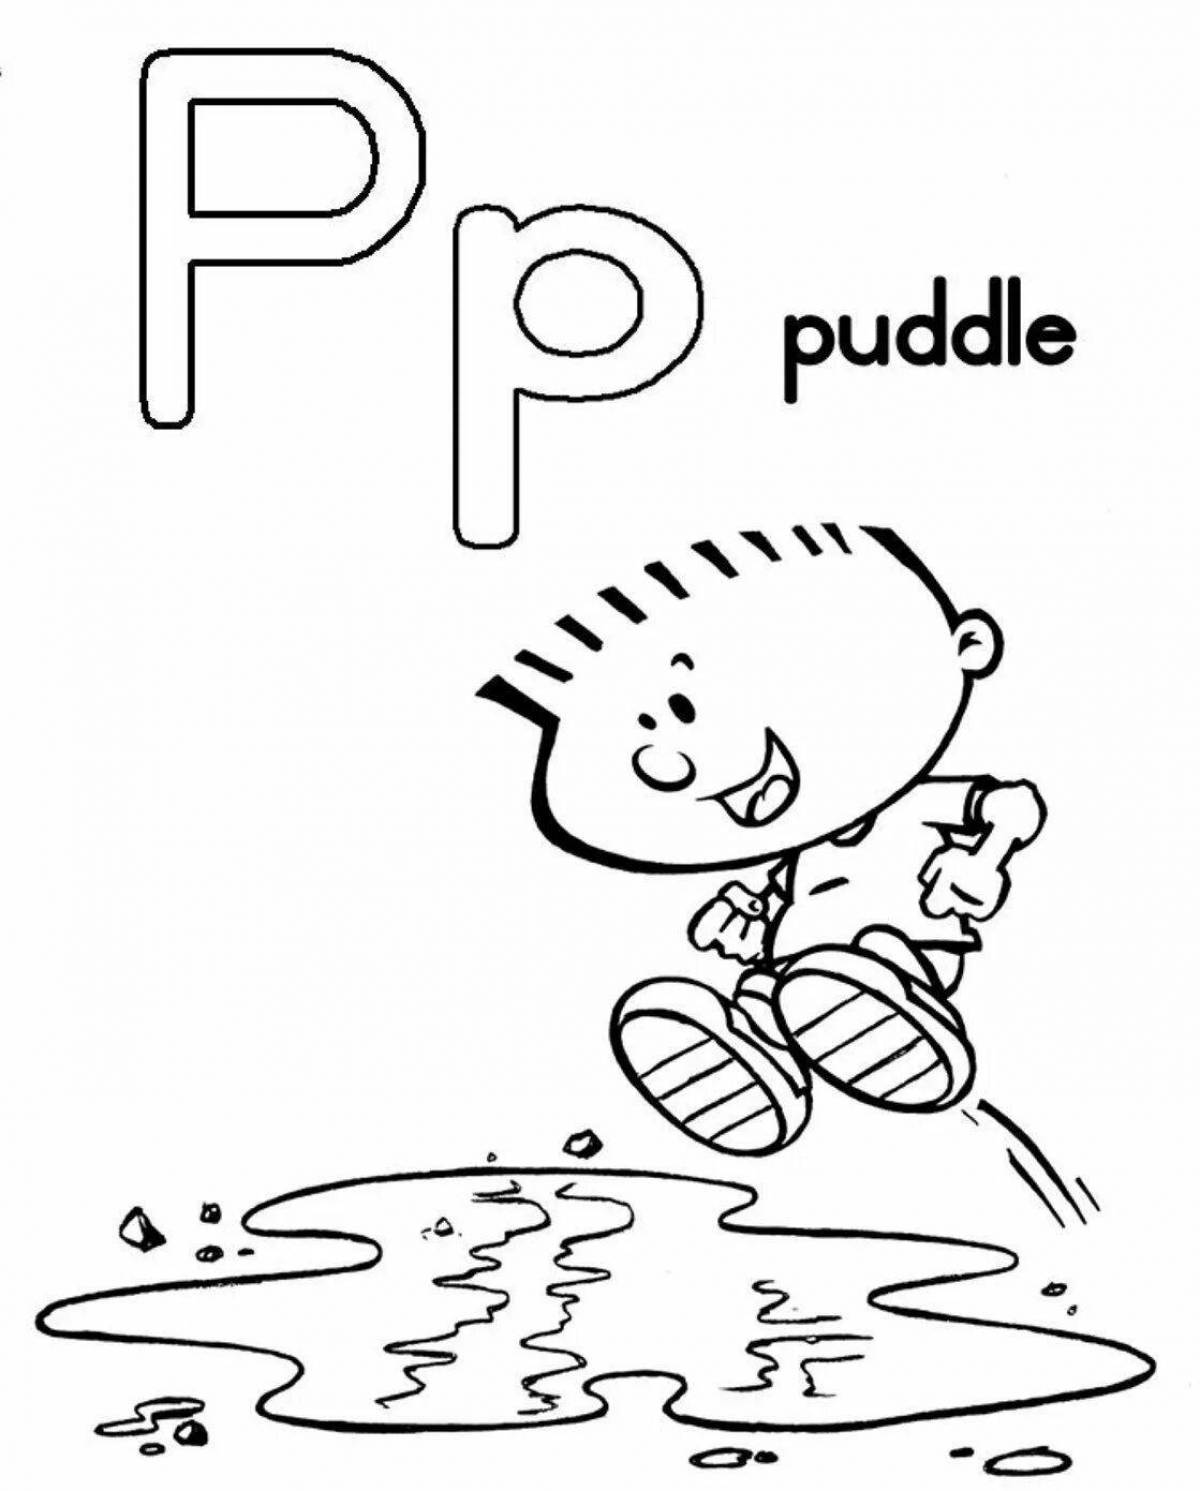 Bright puddle coloring page